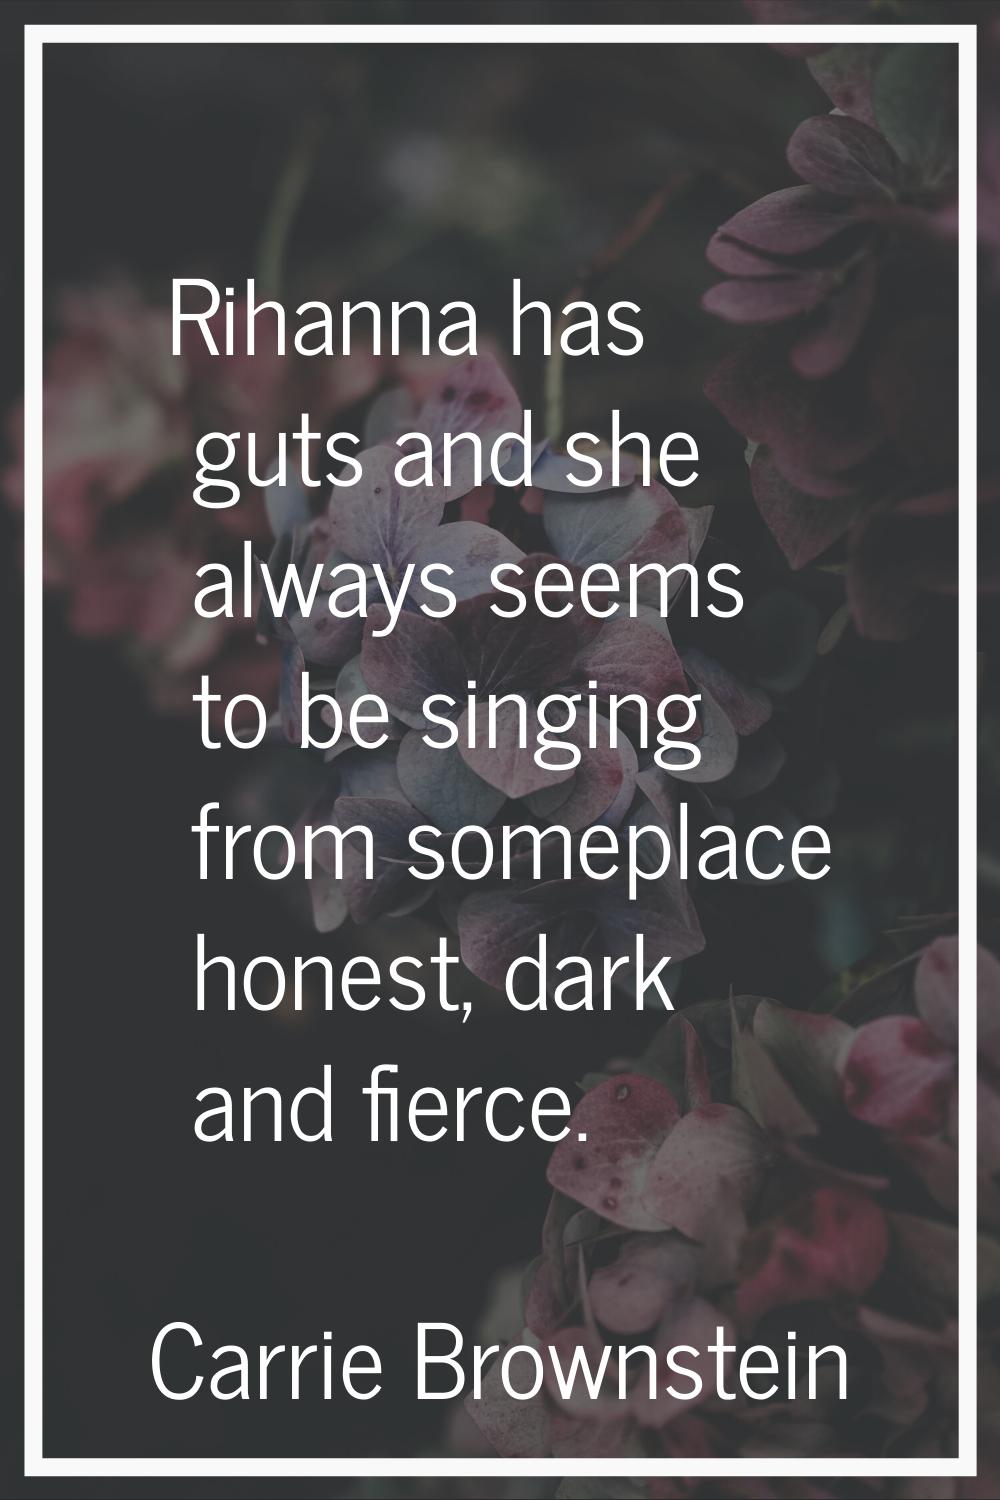 Rihanna has guts and she always seems to be singing from someplace honest, dark and fierce.